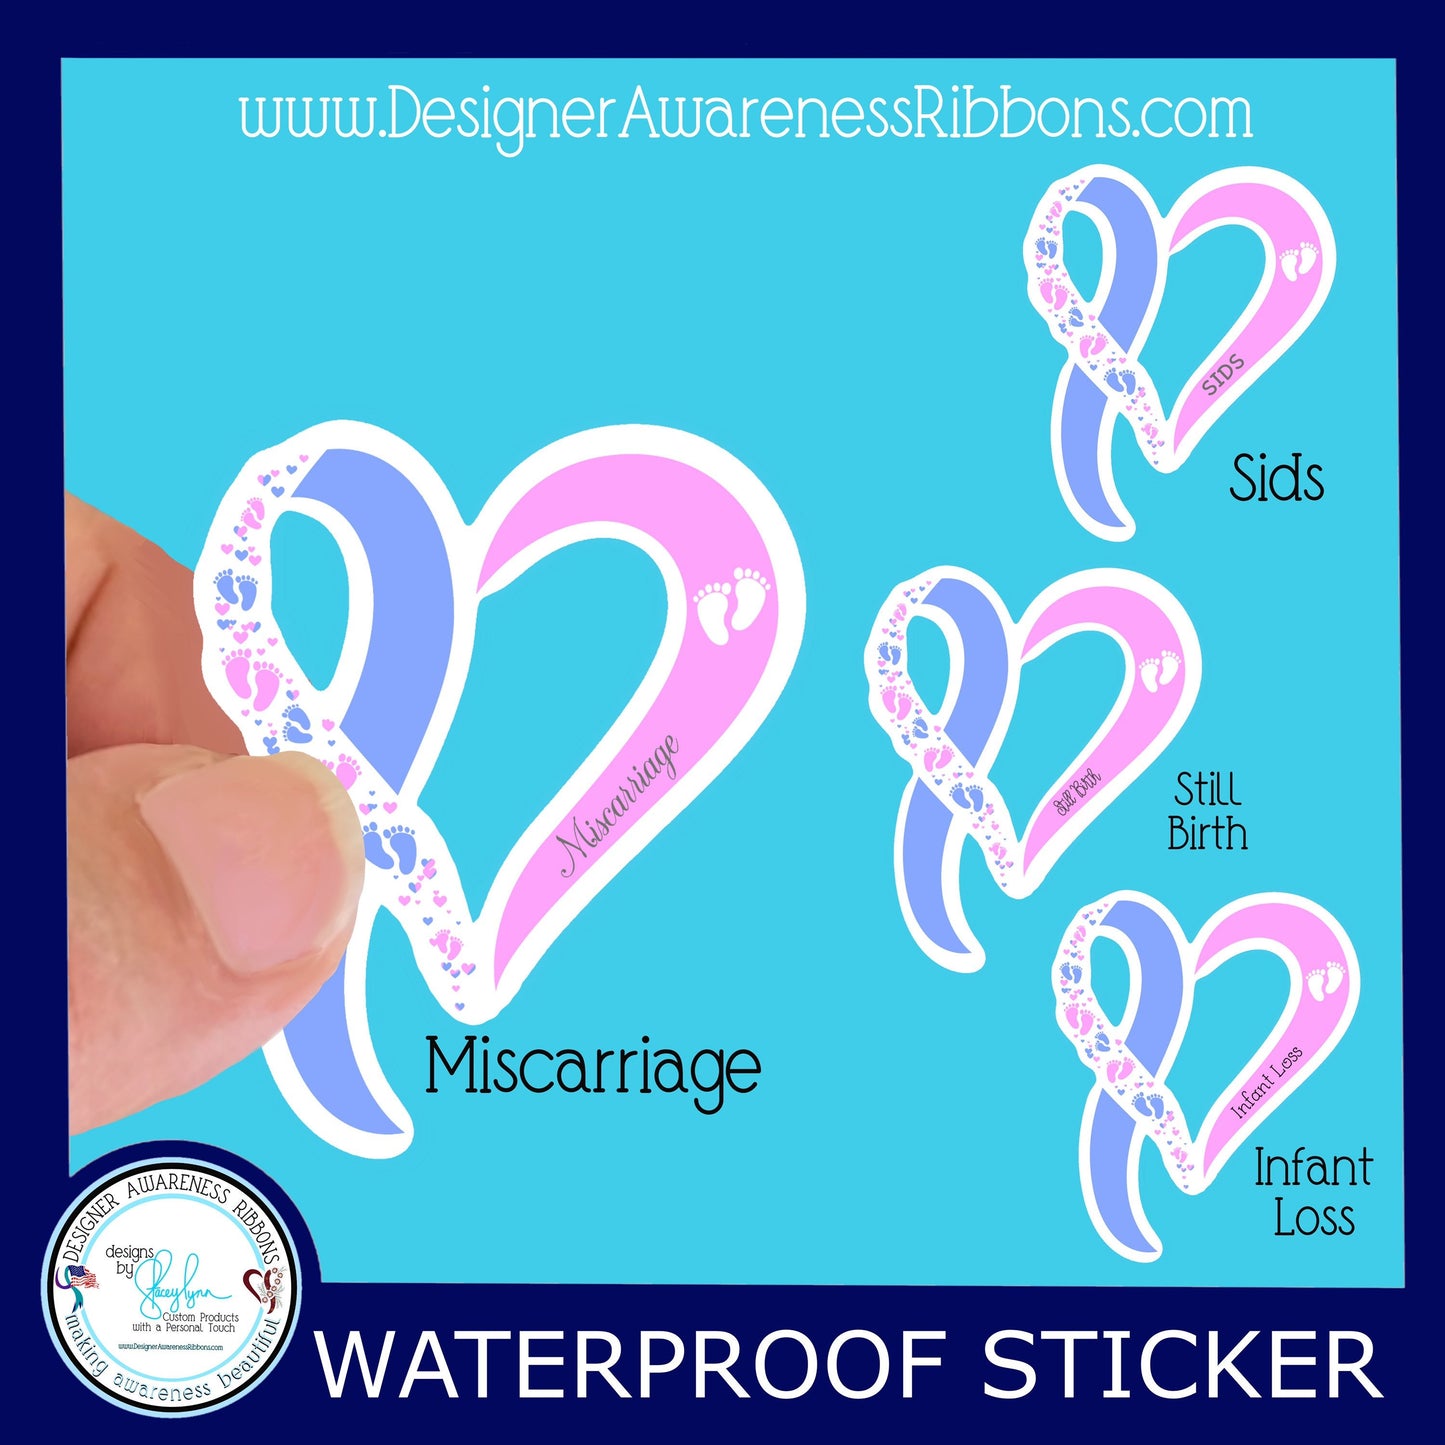 Infant Awareness Ribbon Vinyl Waterproof Sticker, can be used for Miscarriage, SIDS, Infant Loss or Still Birth